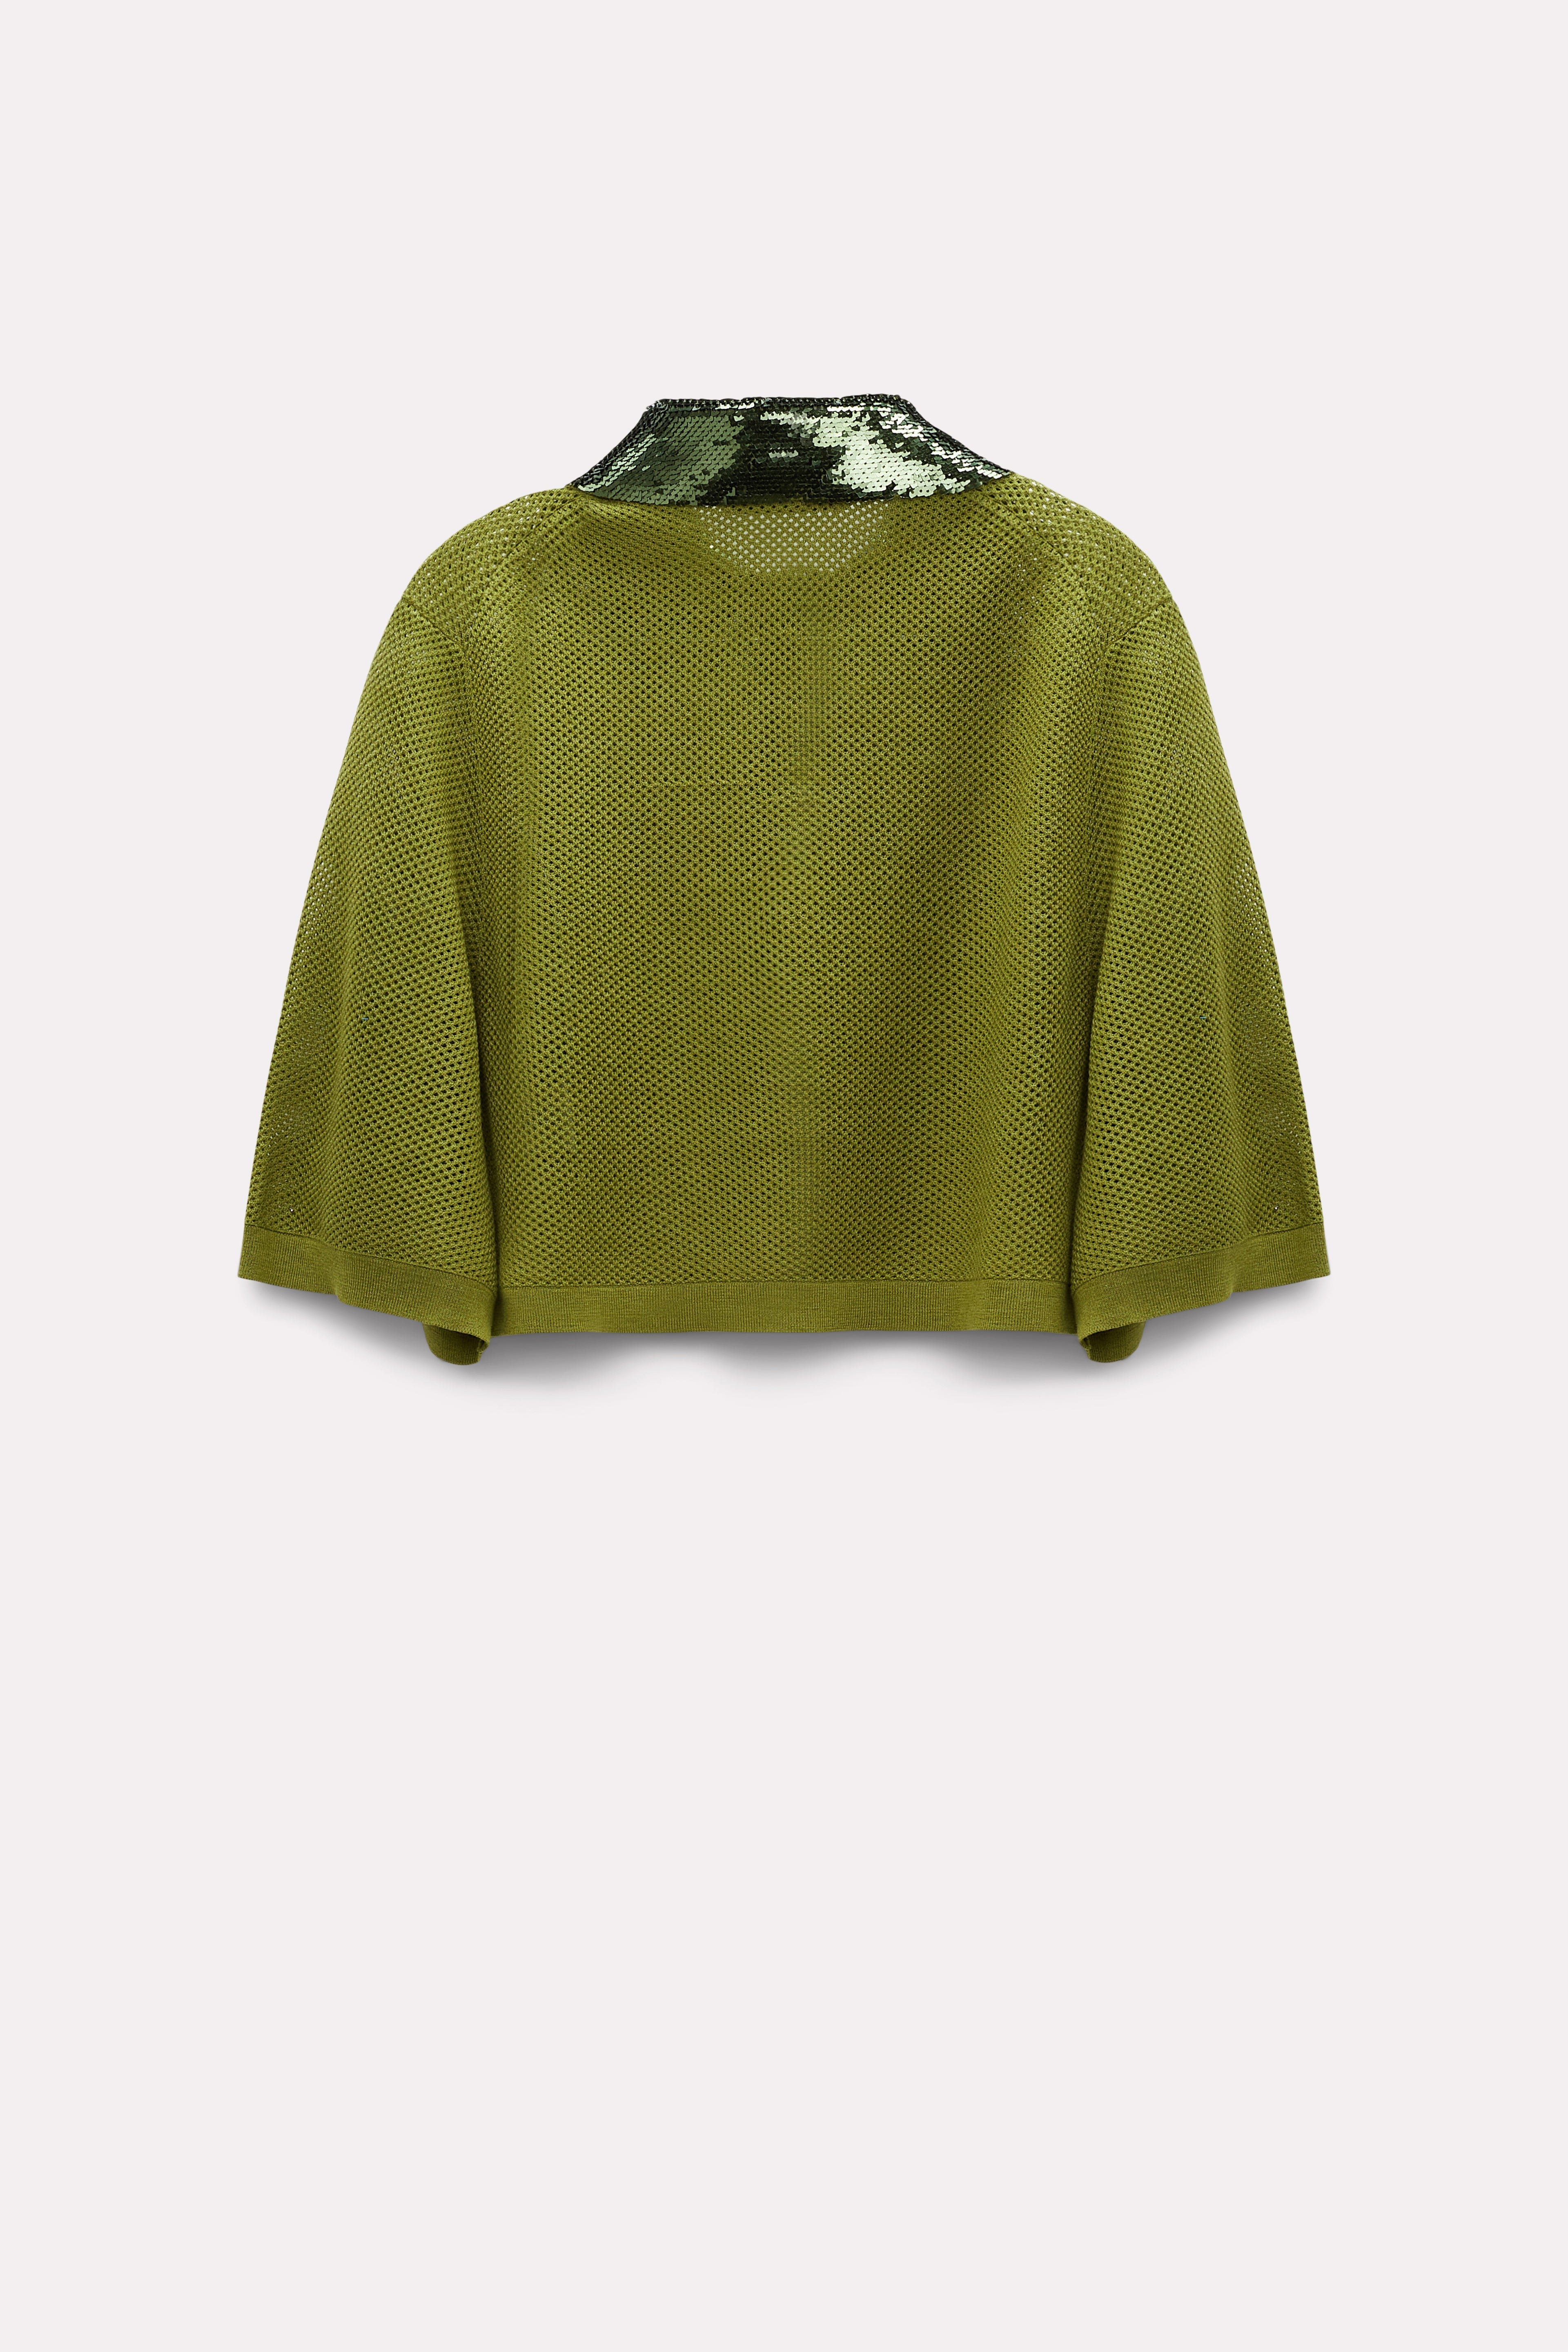 Dorothee-Schumacher-OUTLET-SALE-ESSENTIAL-EASE-pullover-Strick-ARCHIVE-COLLECTION-2.jpg